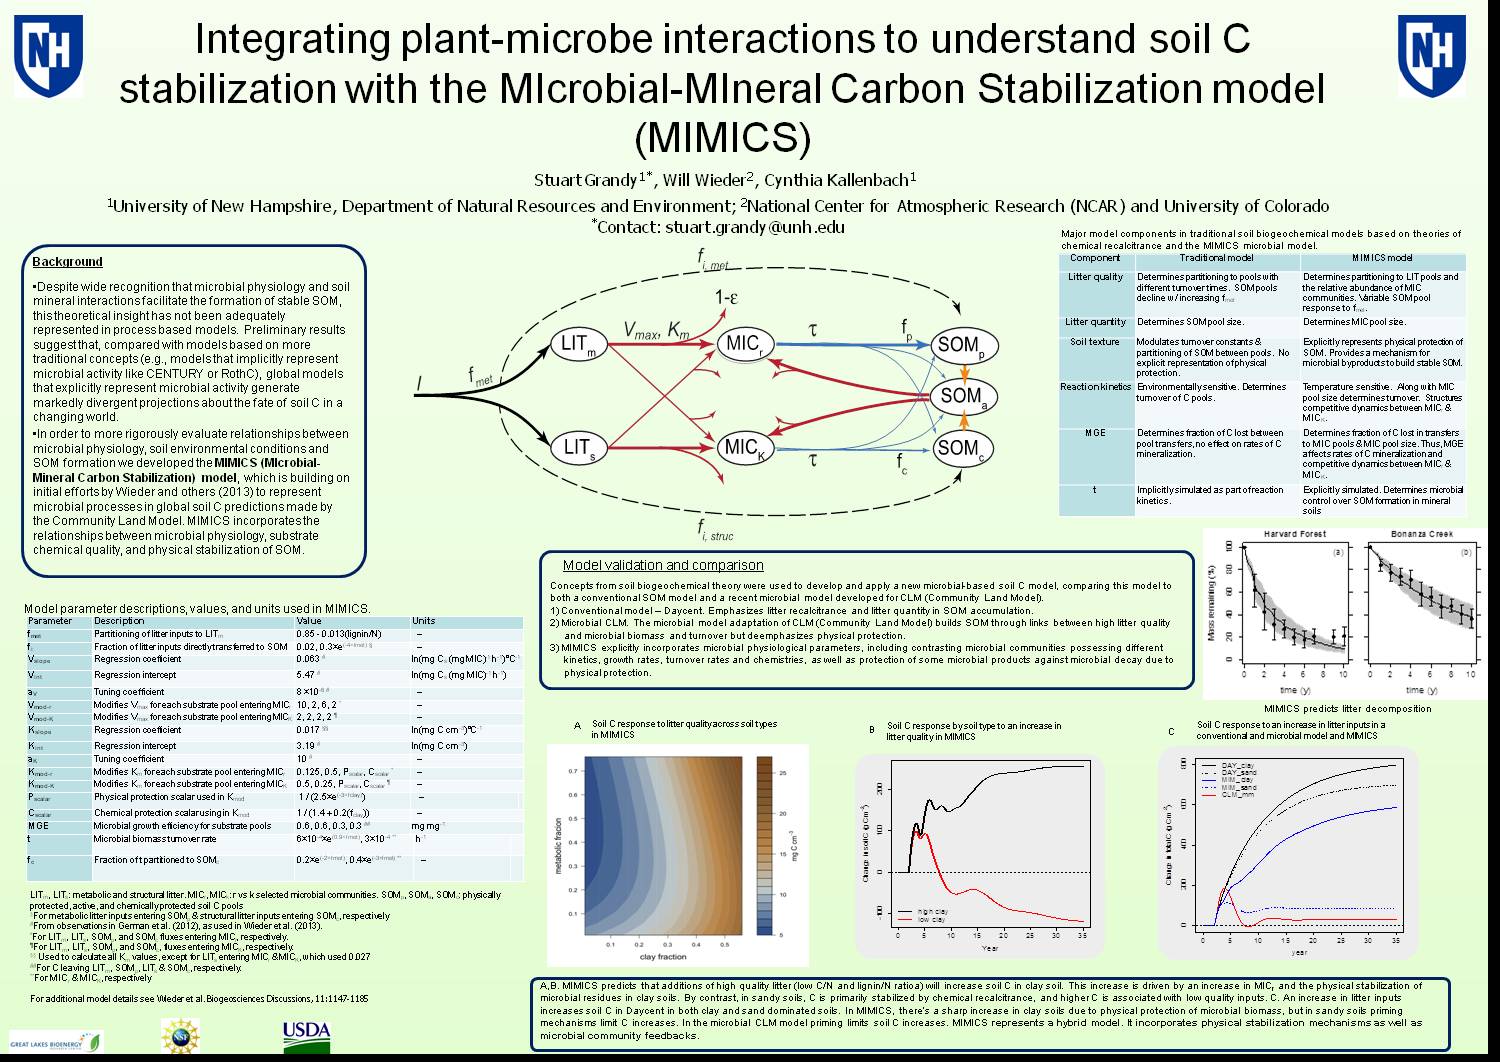 Integrating Plant-Microbe Interactions To Understand Soil C Stabilization With The Microbial-Mineral Carbon Stabilization Model by StuartGrandy